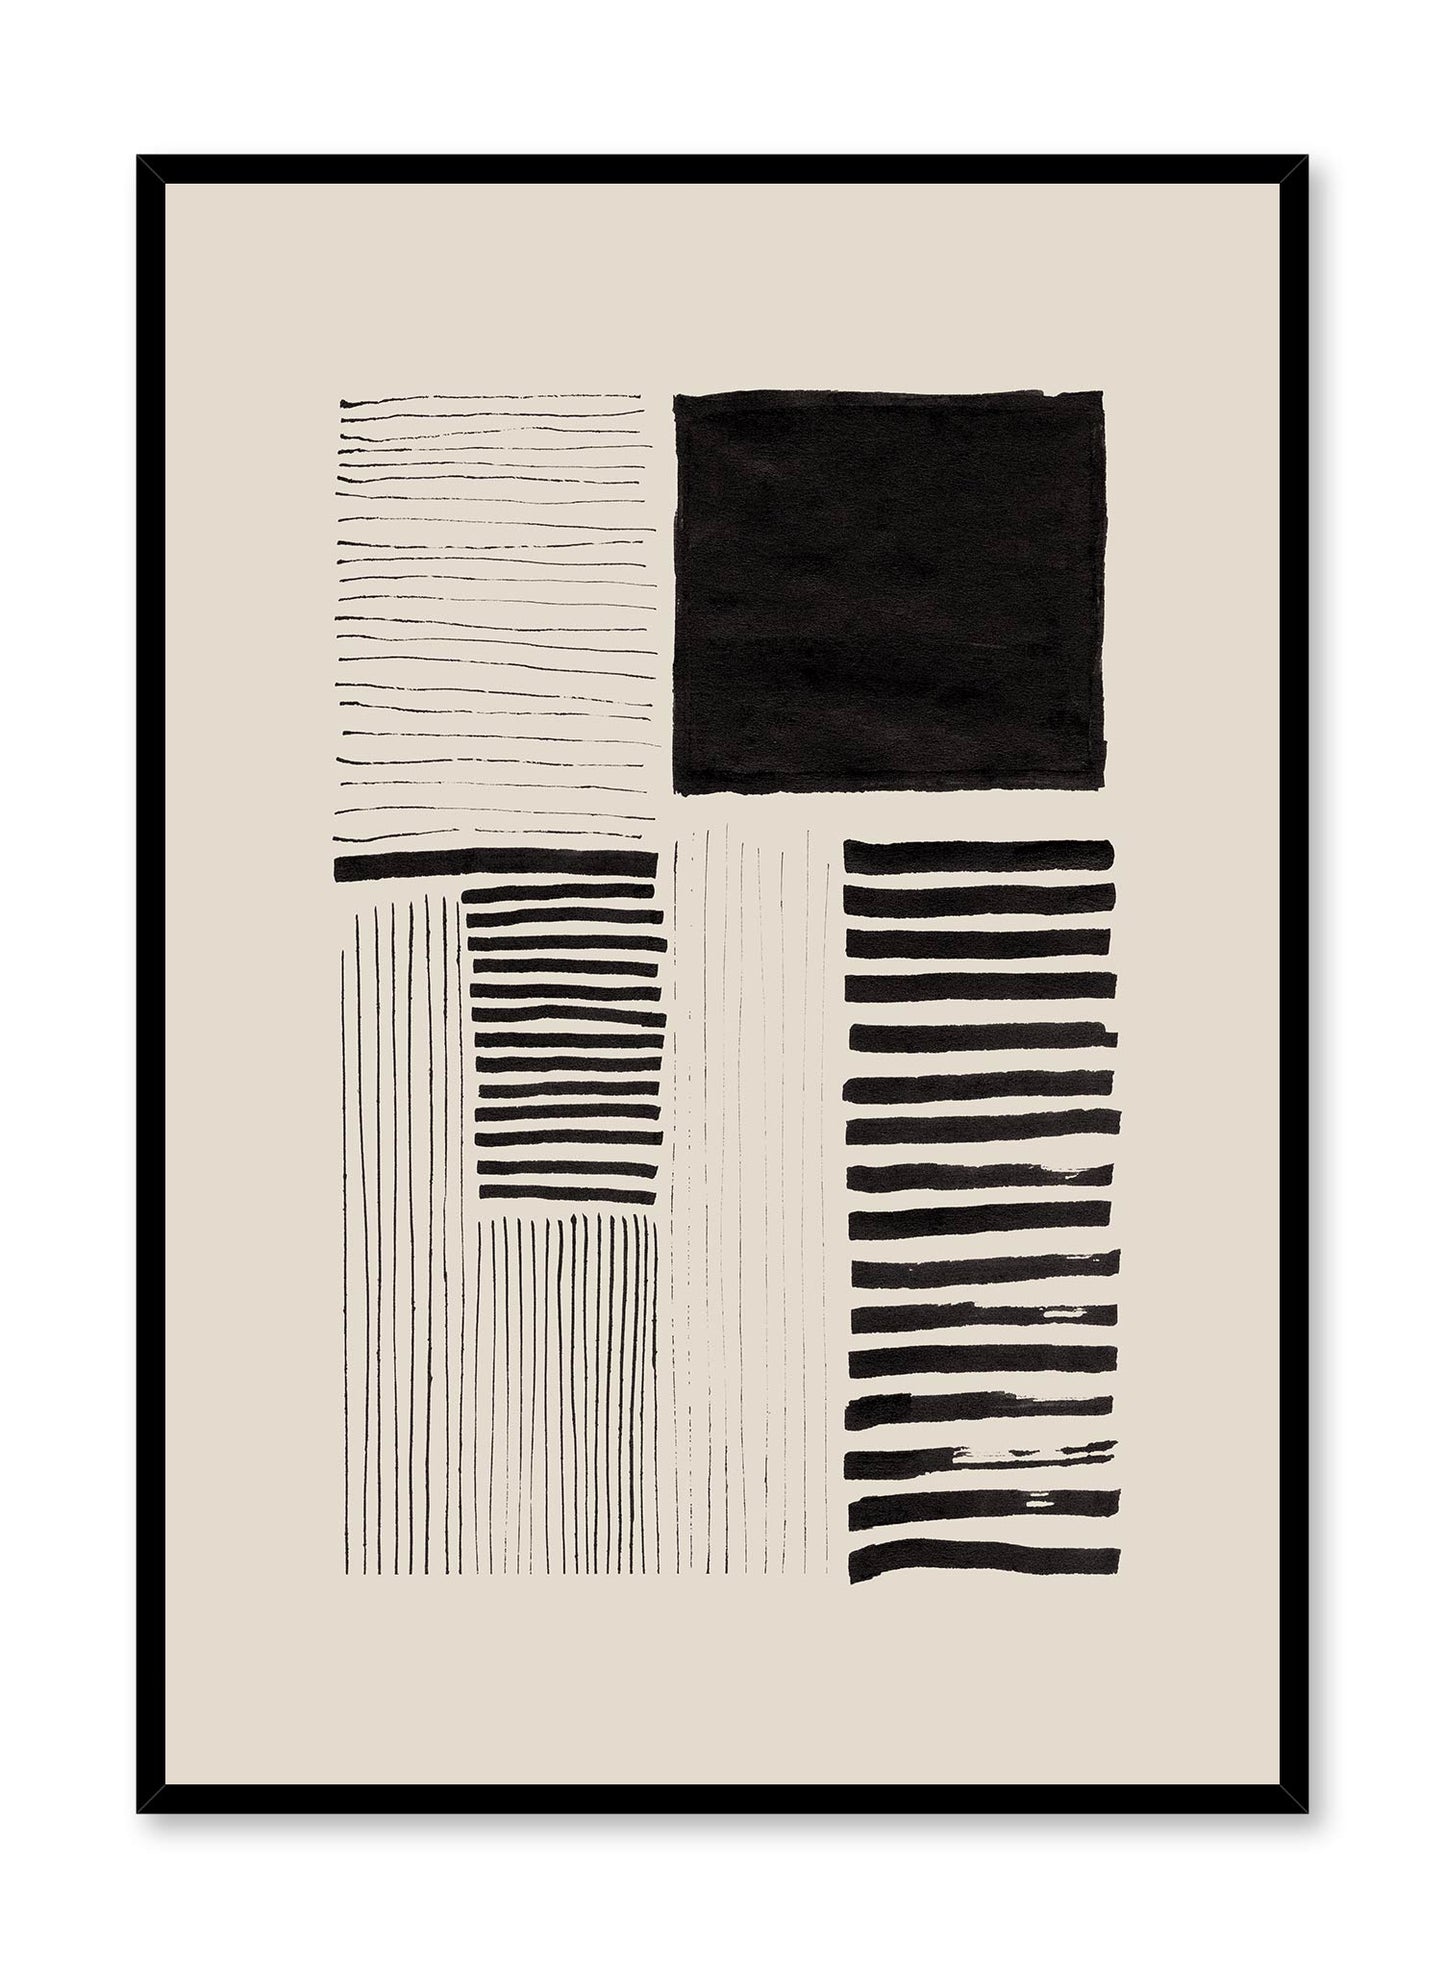 Between the Lines is a minimalist abstract illustration of black striped lines of different thickness and a black square by Opposite Wall.